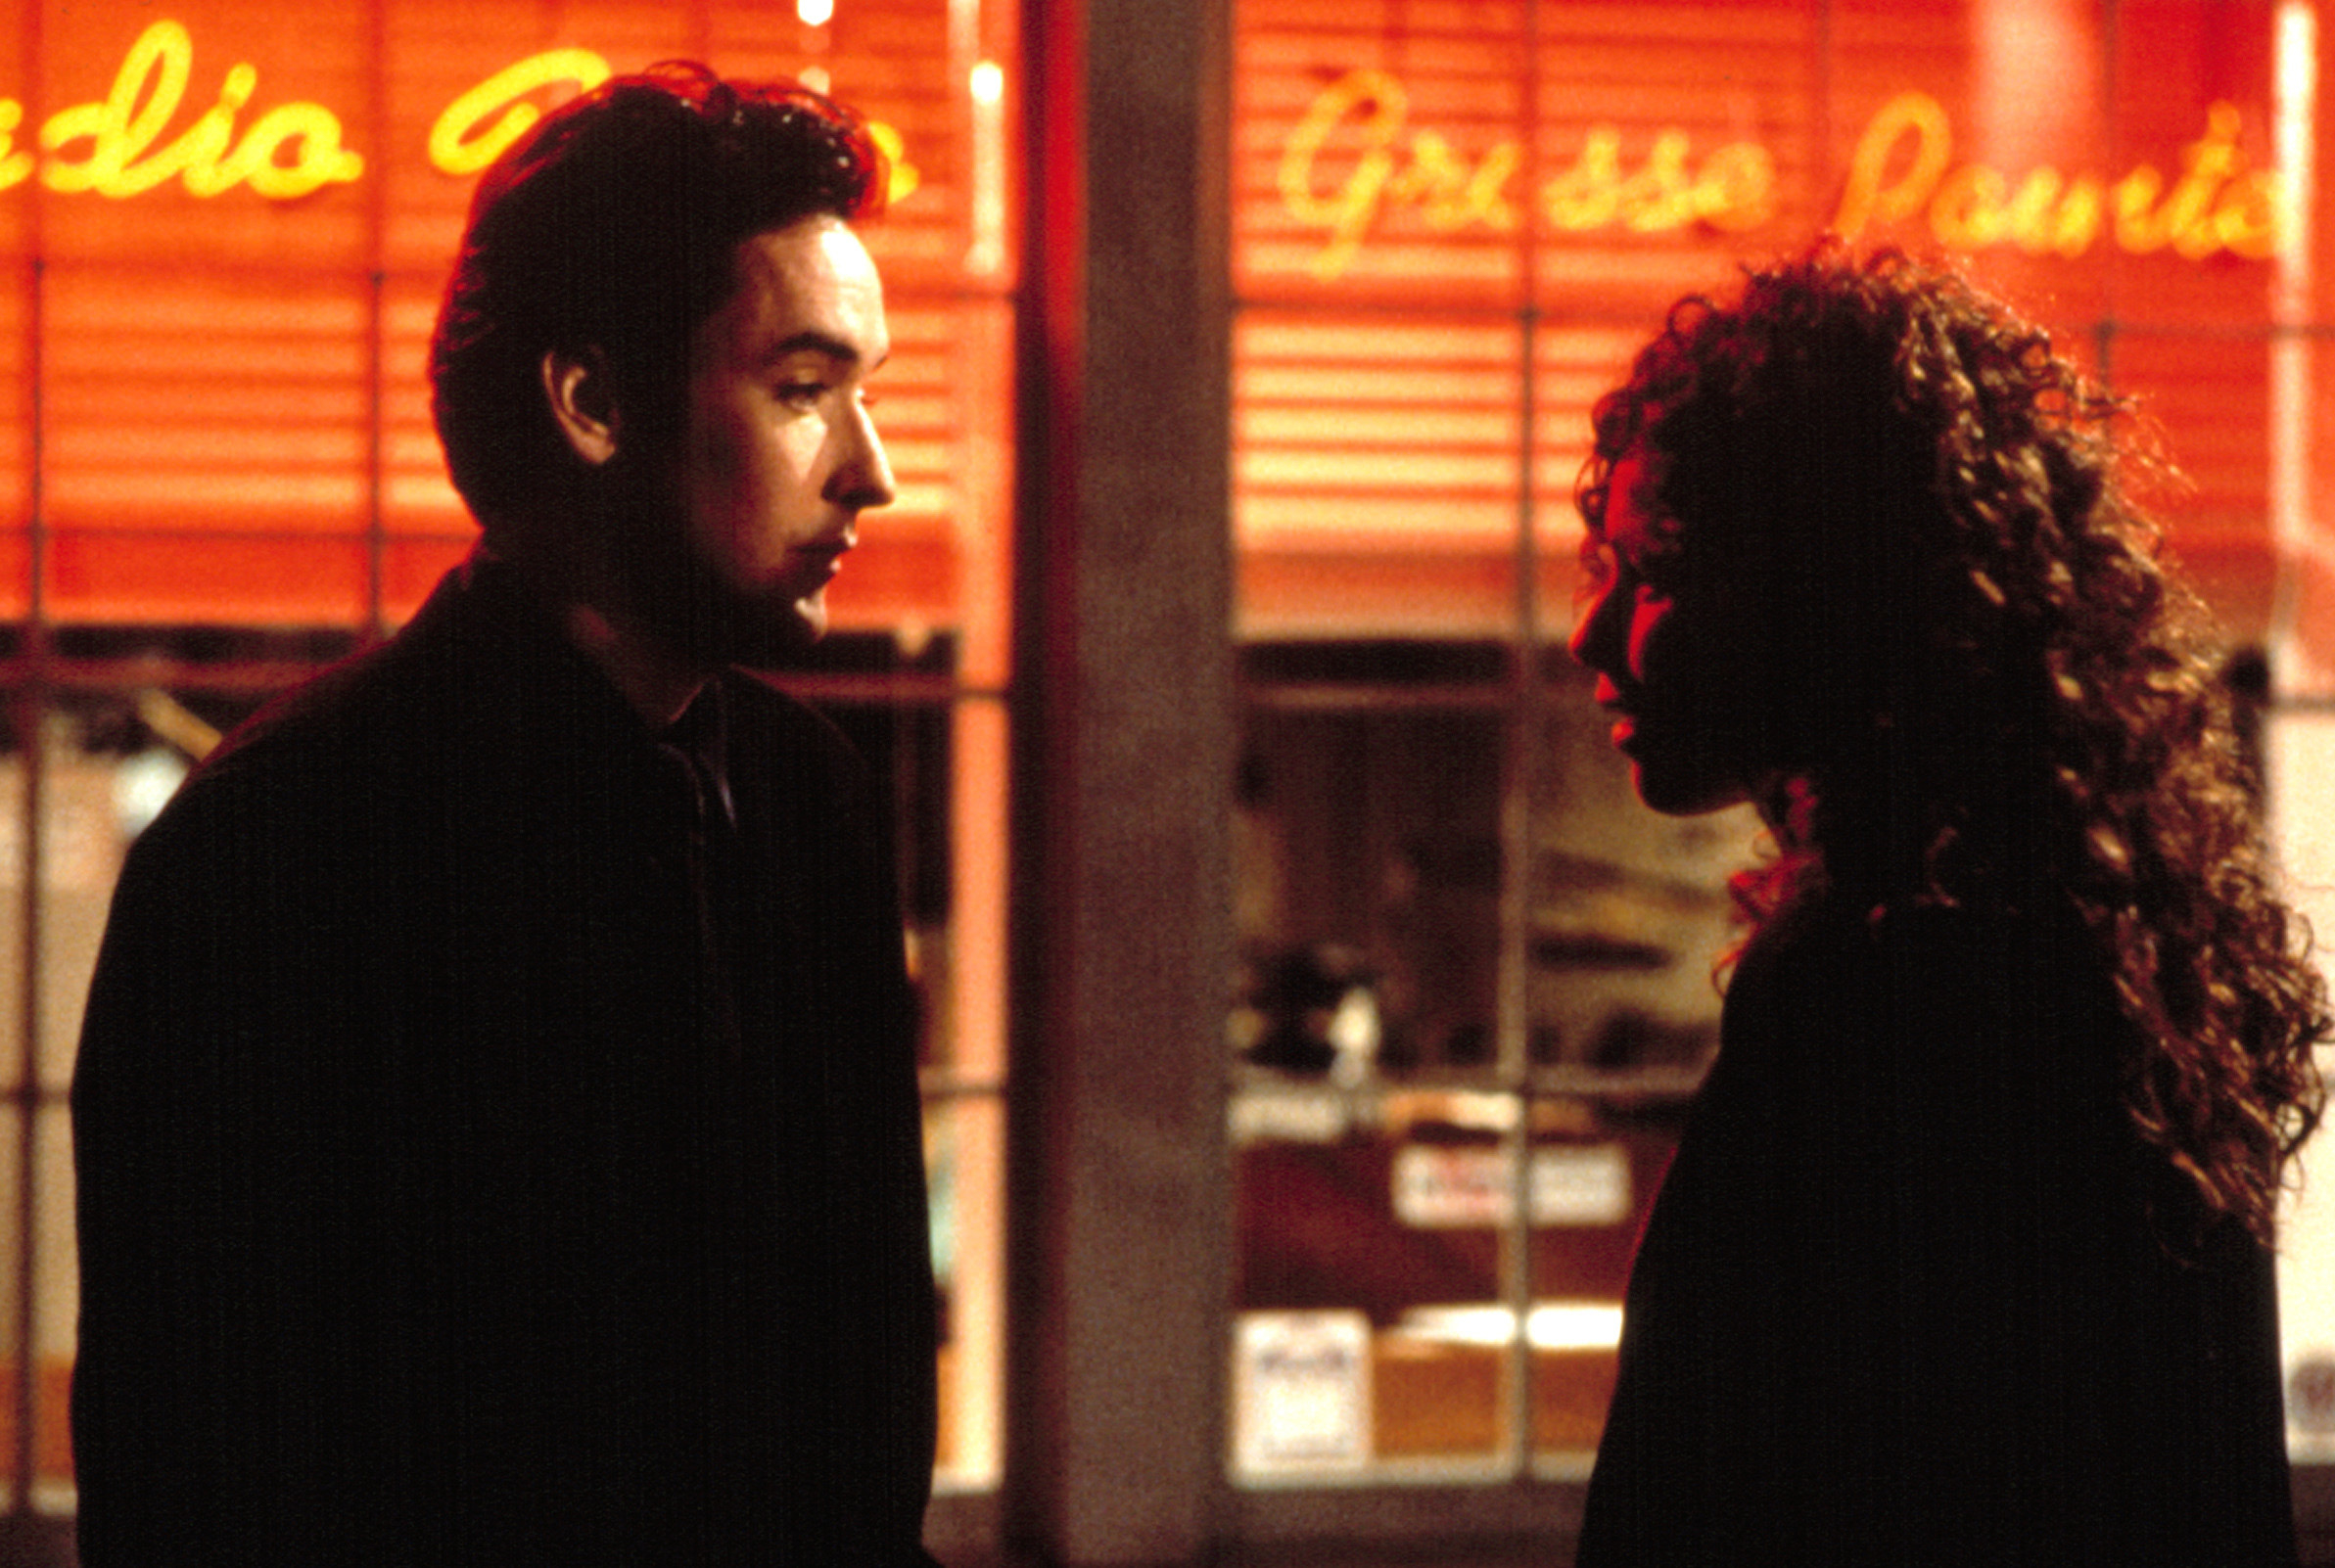 John Cusack and Minnie Driver in “Grosse Pointe Blank”